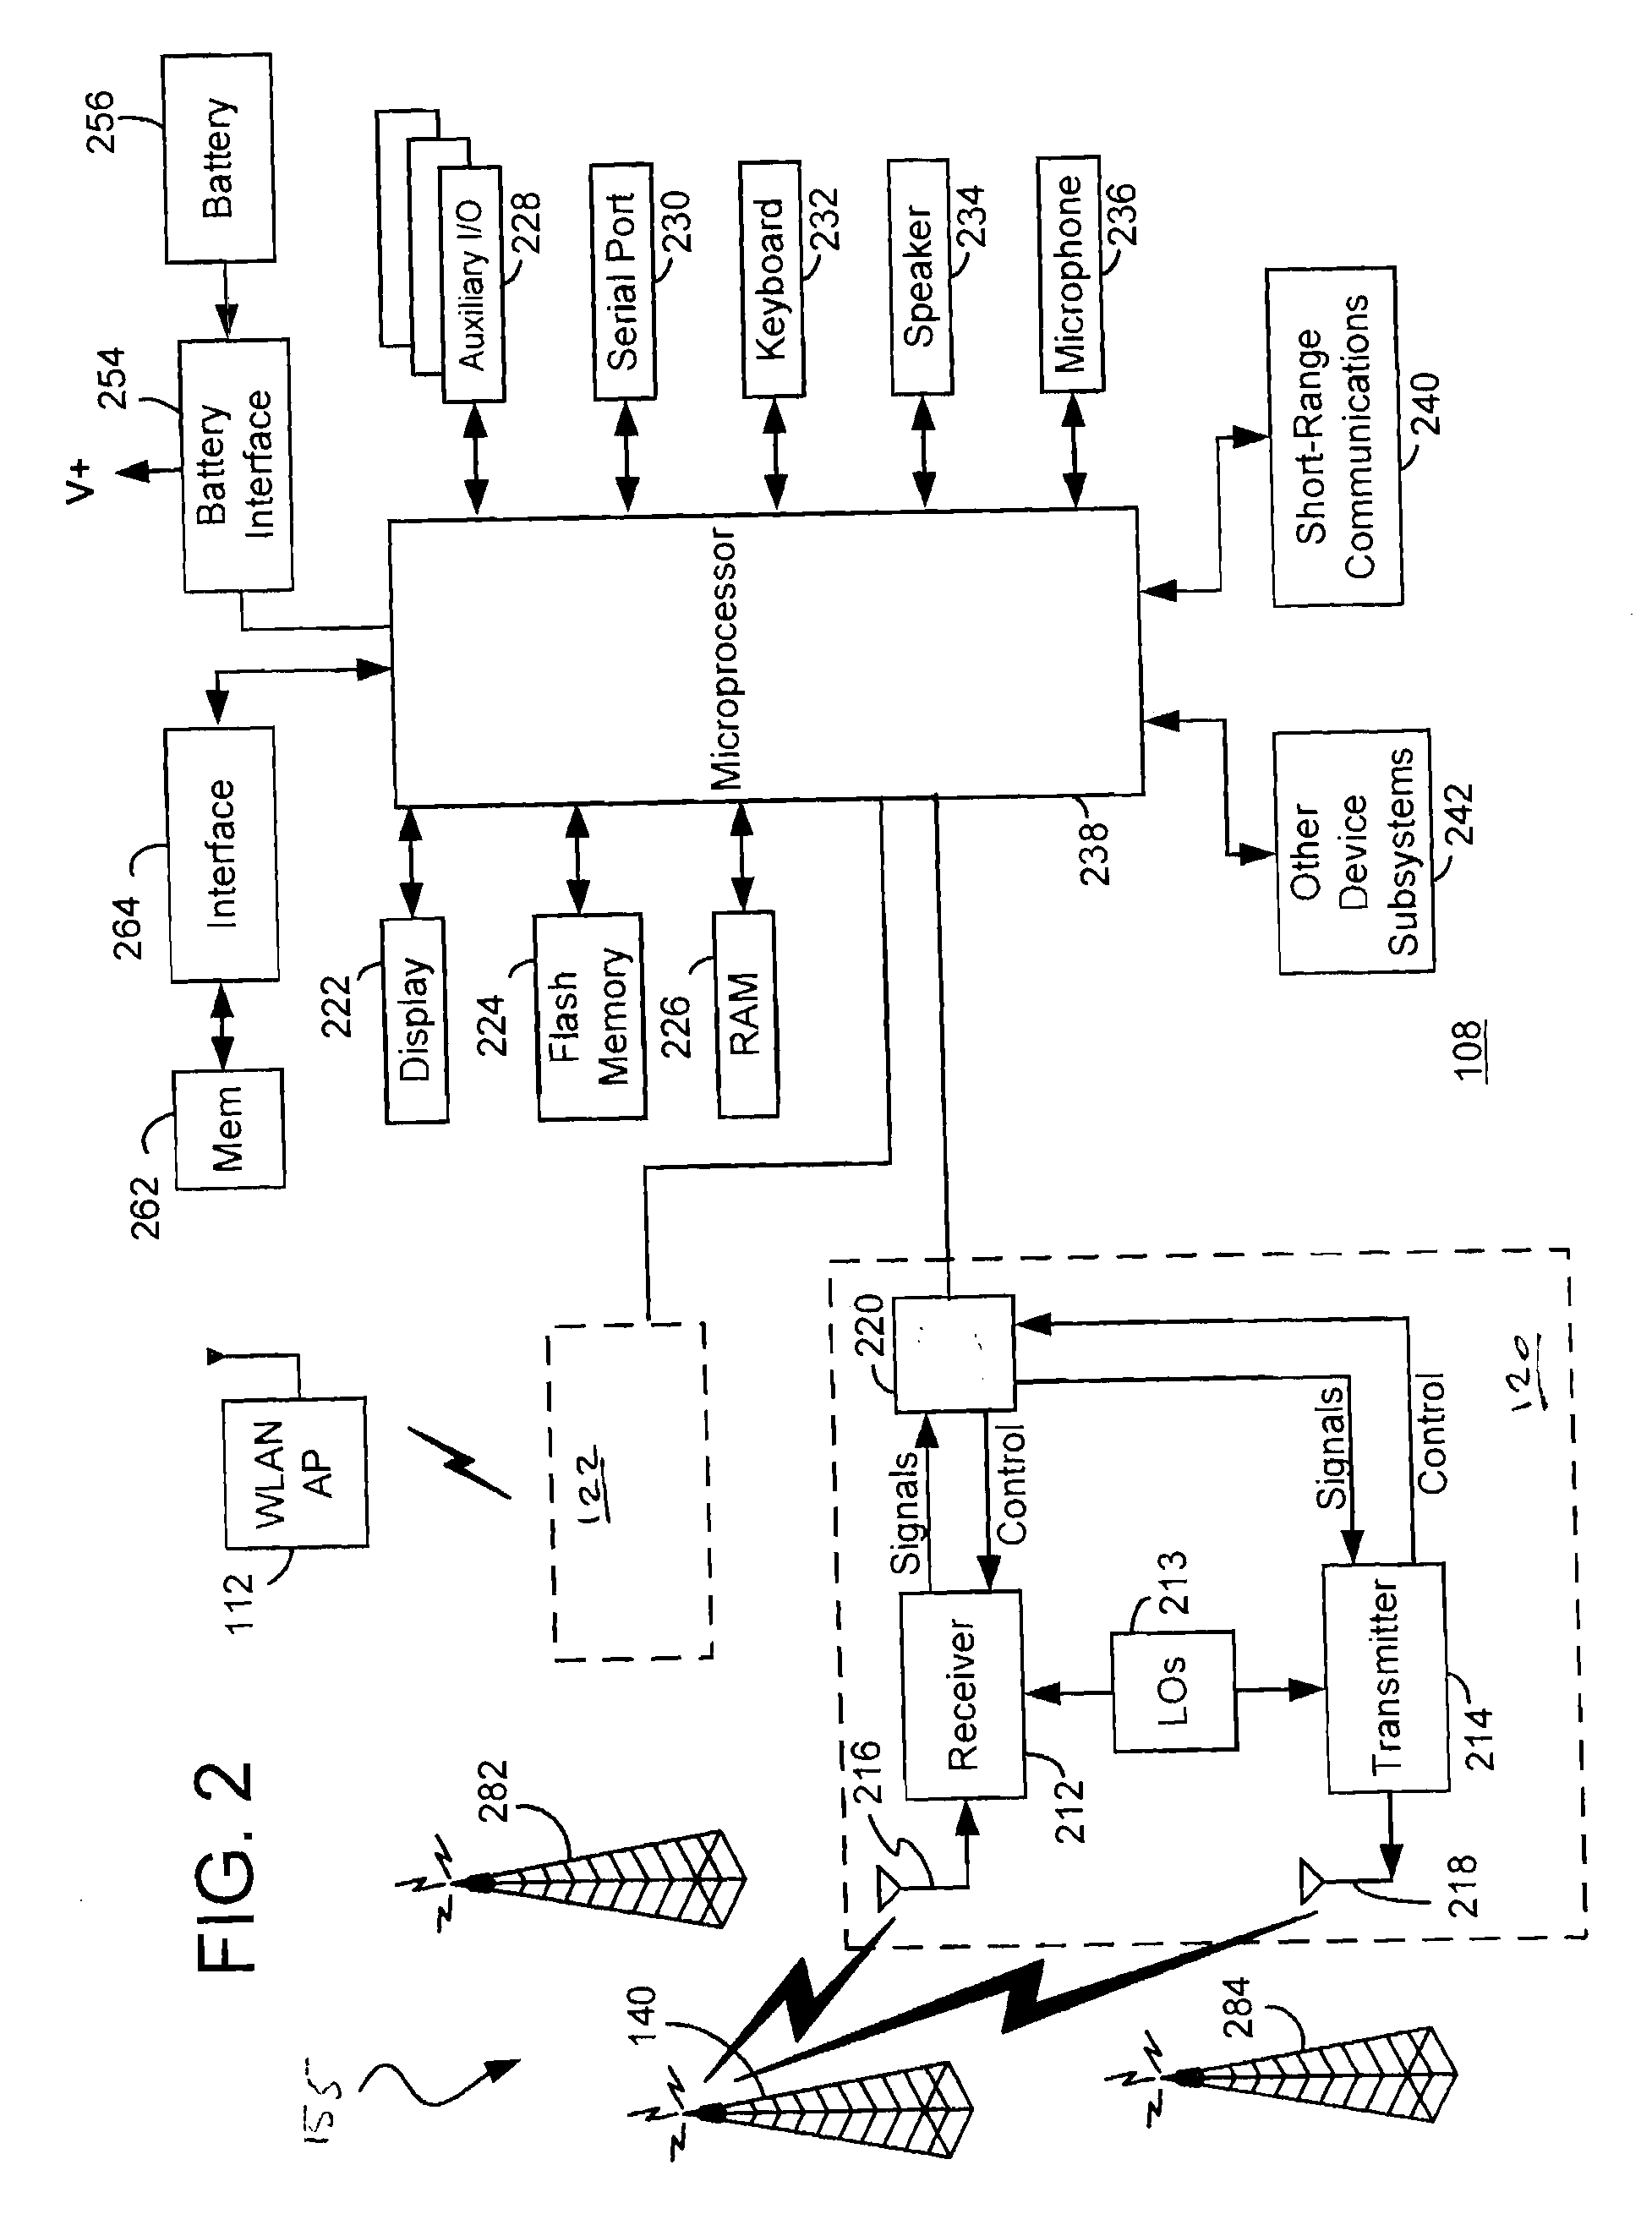 Conferencing PSTN Gateway Methods And Apparatus To Facilitate Heterogeneous Wireless Network Handovers For Mobile Communication Devices